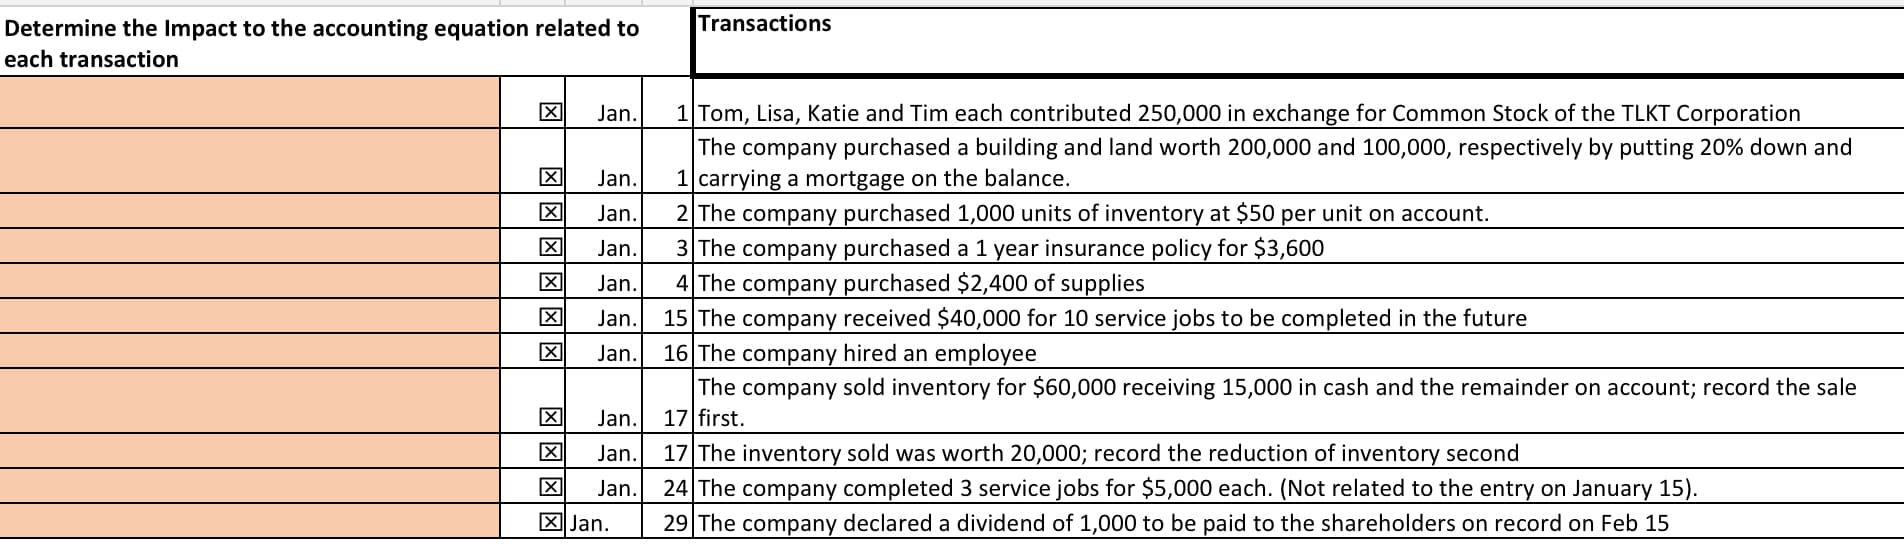 Determine the Impact to the accounting equation related to
Transactions
each transaction
1 Tom, Lisa, Katie and Tim each contributed 250,000 in exchange for Common Stock of the TLKT Corporation
The company purchased a building and land worth 200,000 and 100,000, respectively by putting 20% down and
1 carrying a mortgage on the balance.
2 The company purchased 1,000 units of inventory at $50 per unit on account.
3 The company purchased a 1 year insurance policy for $3,600
4 The company purchased $2,400 of supplies
15 The company received $40,000 for 10 service jobs to be completed in the future
Jan.
Jan.
Jan.
Jan.
Jan.
Jan.
Jan.
16 The company hired an employee
The company sold inventory for $60,000 receiving 15,000 in cash and the remainder on account; record the sale
Jan.
17 first.
17 The inventory sold was worth 20,000; record the reduction of inventory second
24 The company completed 3 service jobs for $5,000 each. (Not related to the entry on January 15).
Jan.
Jan.
X Jan.
29 The company declared a dividend of 1,000 to be paid to the shareholders on record on Feb 15
図回回回区区
